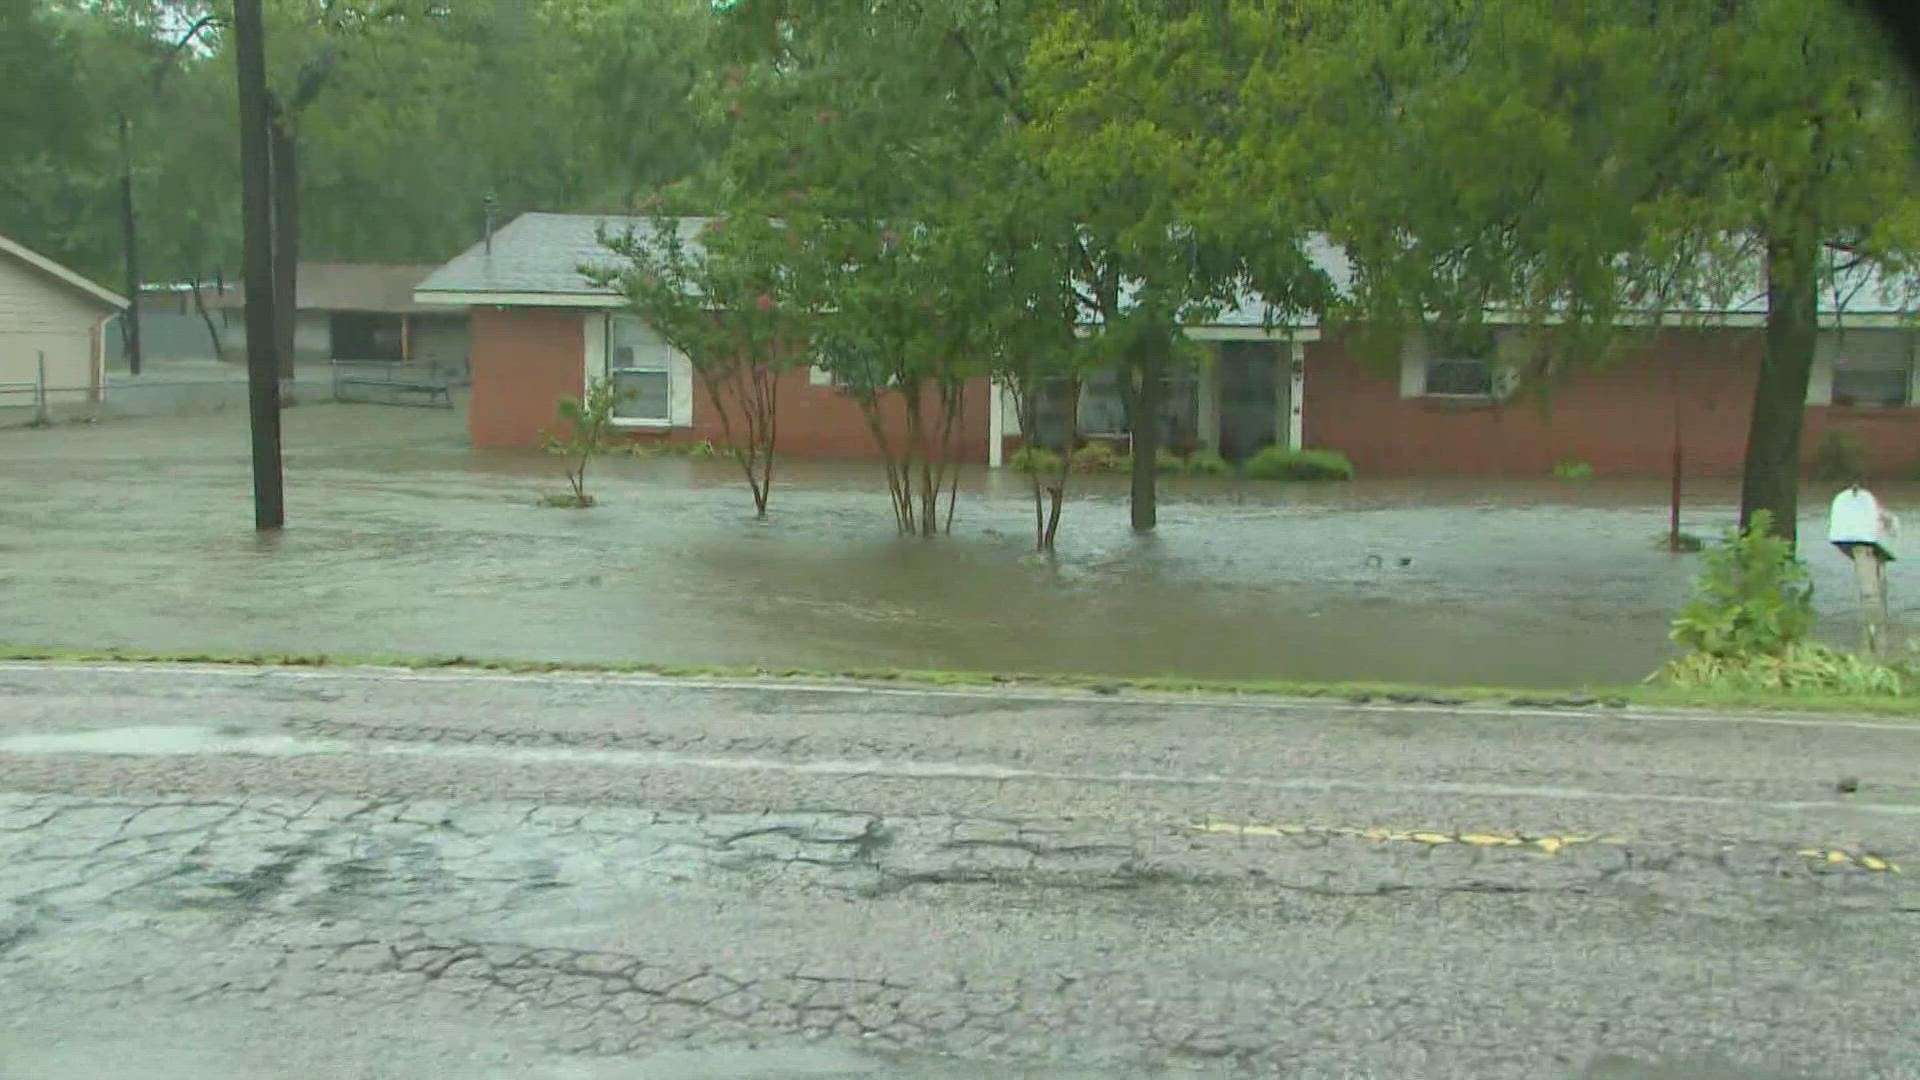 Several residents have been displaced in Balch Springs as storms bring several inches of rain in just a few hours.